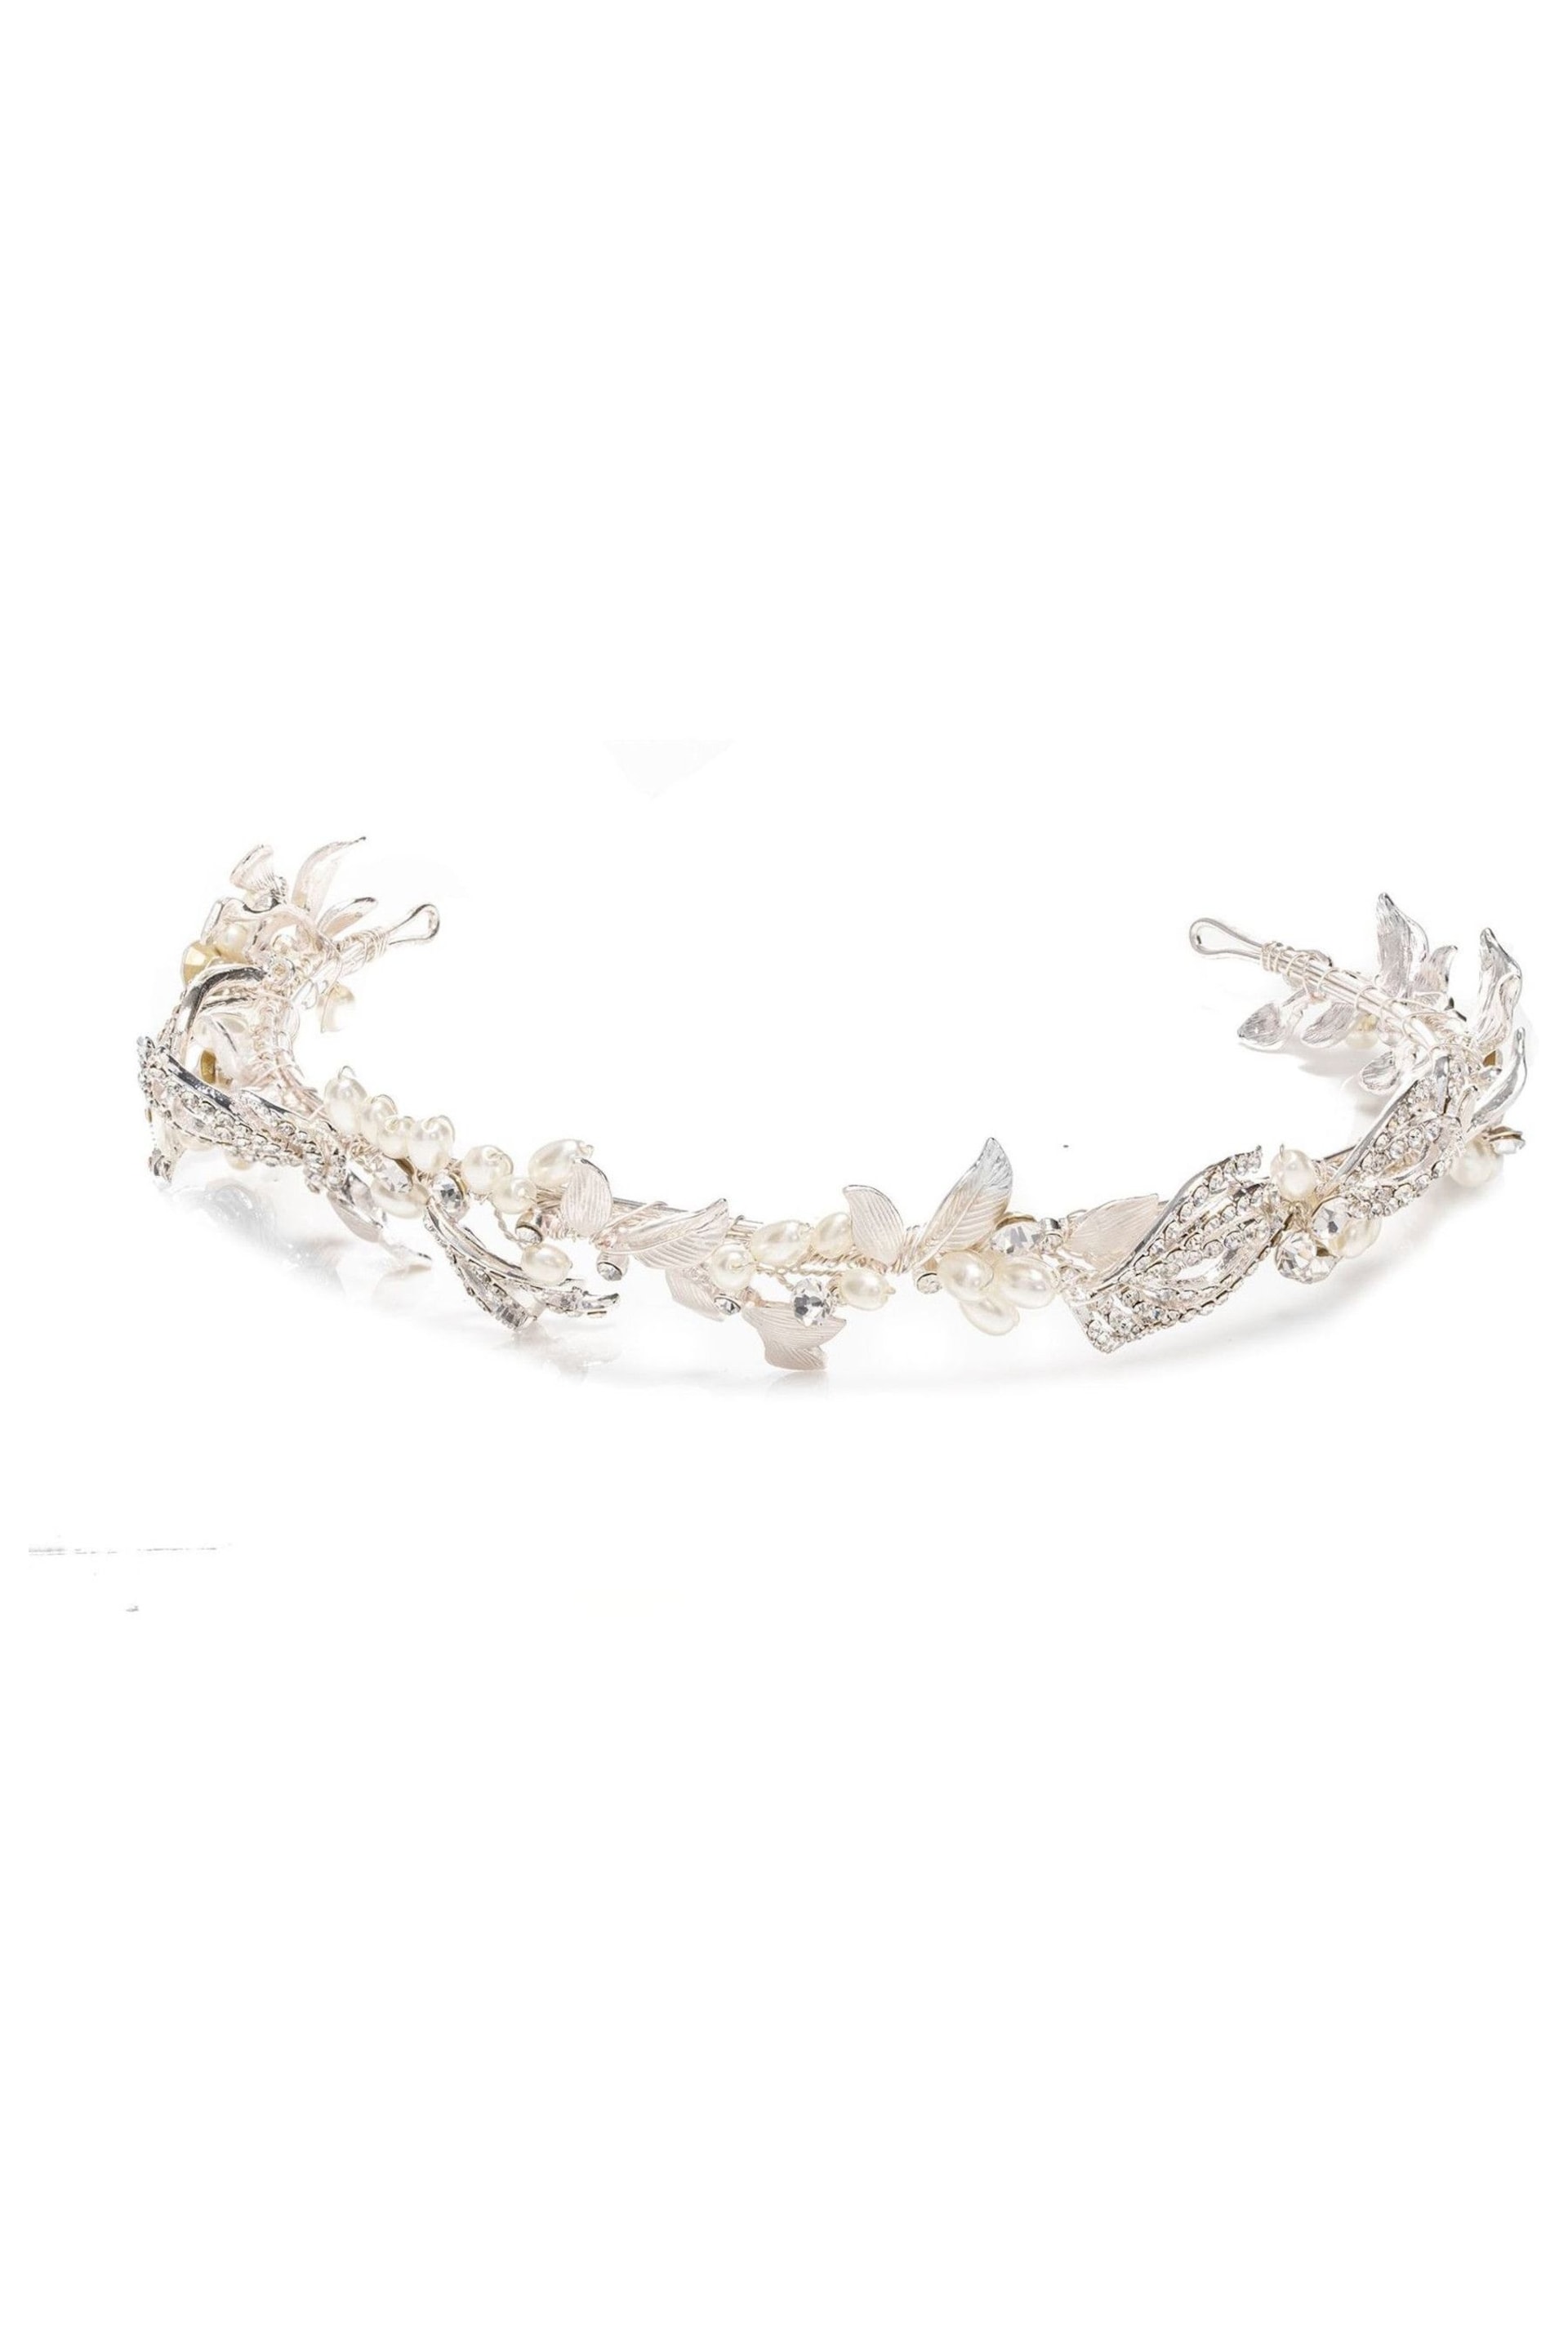 Jon Richard Silver Delilah Silver Plated Pave Feather And Pearl Tiara - Gift Pouch - Image 1 of 2